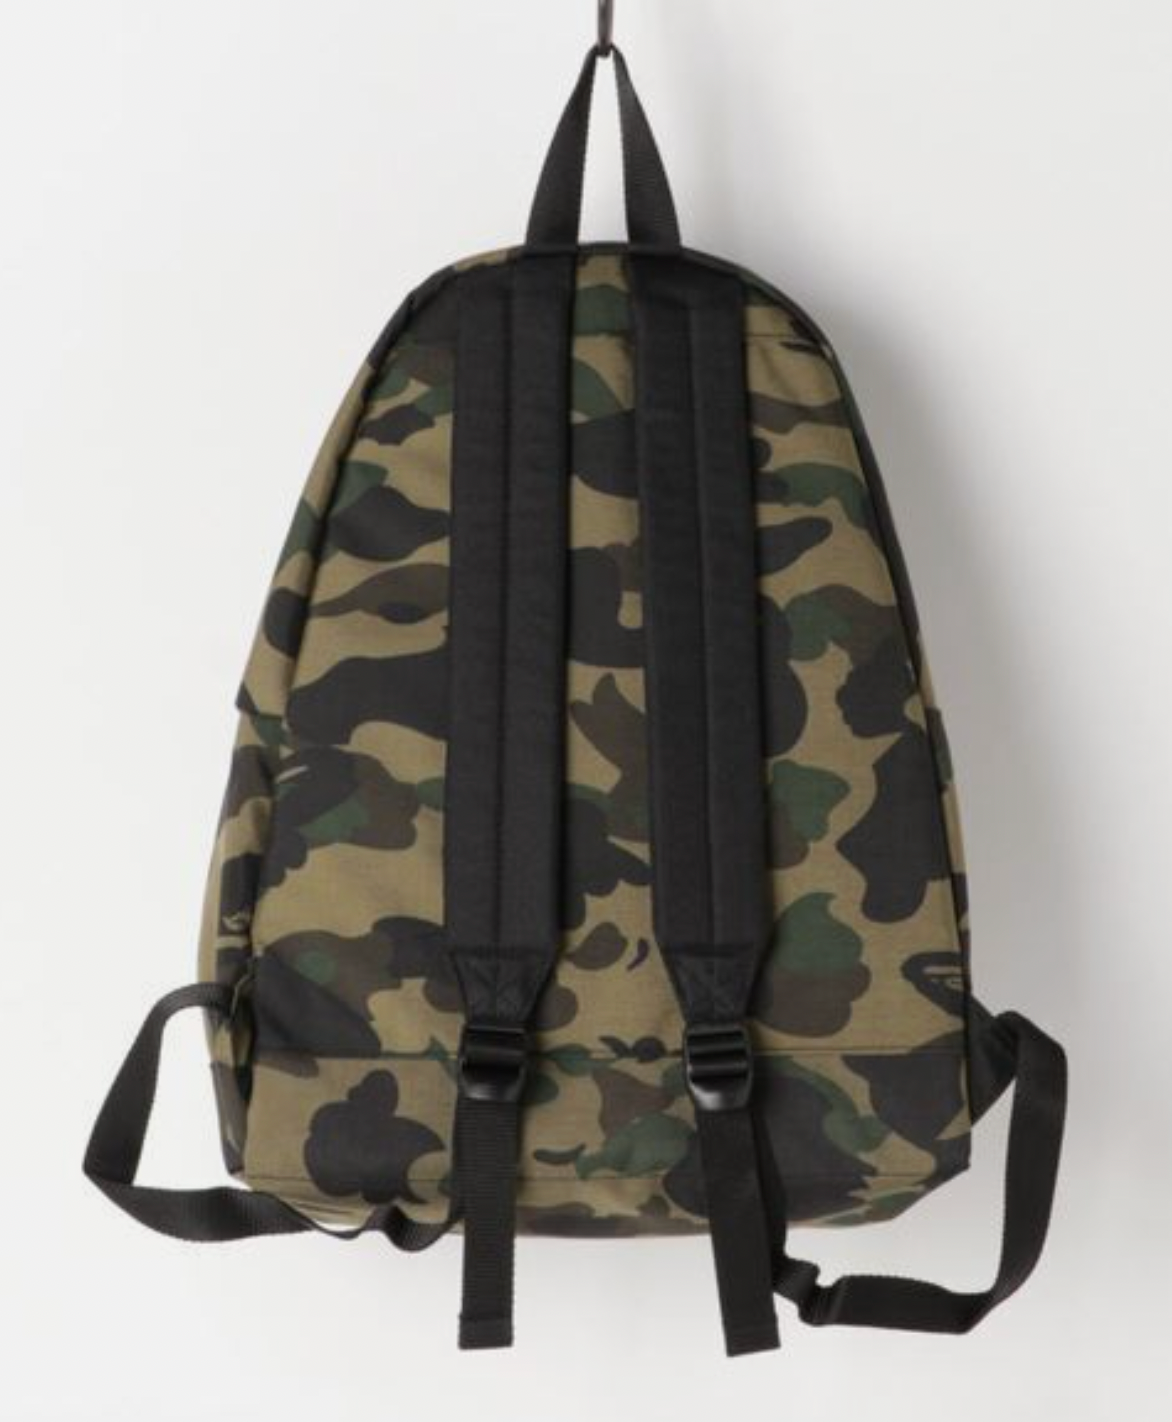 A BATHING APE CORDURA BACKPACK 1ST CAMO DAY PACK GREEN